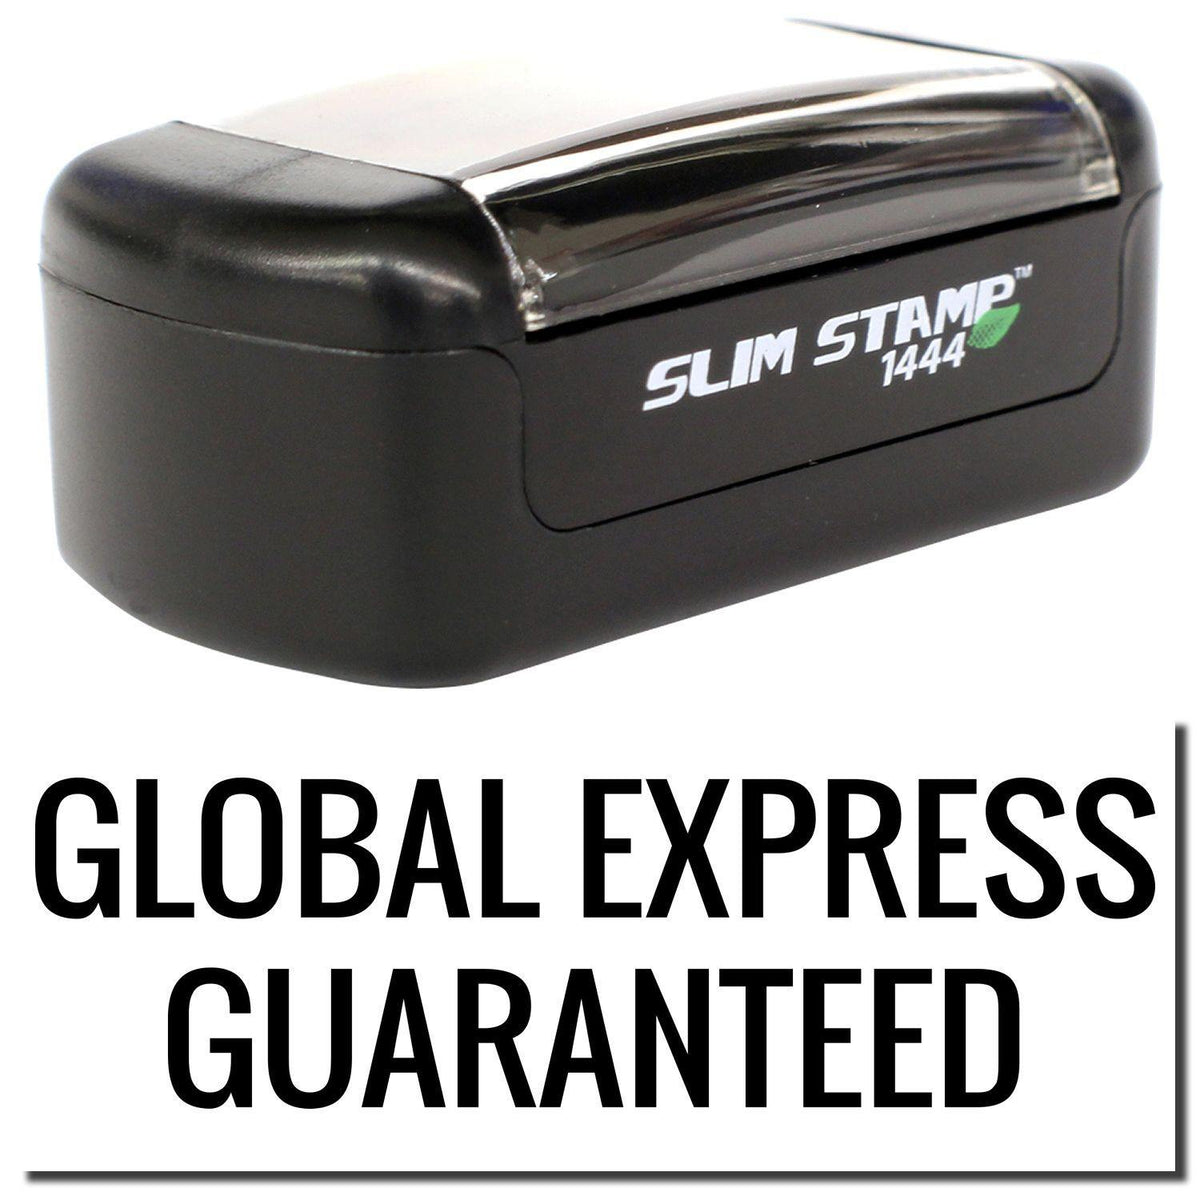 A stock office pre-inked stamp with a stamped image showing how the text &quot;GLOBAL EXPRESS GUARANTEED&quot; is displayed after stamping.